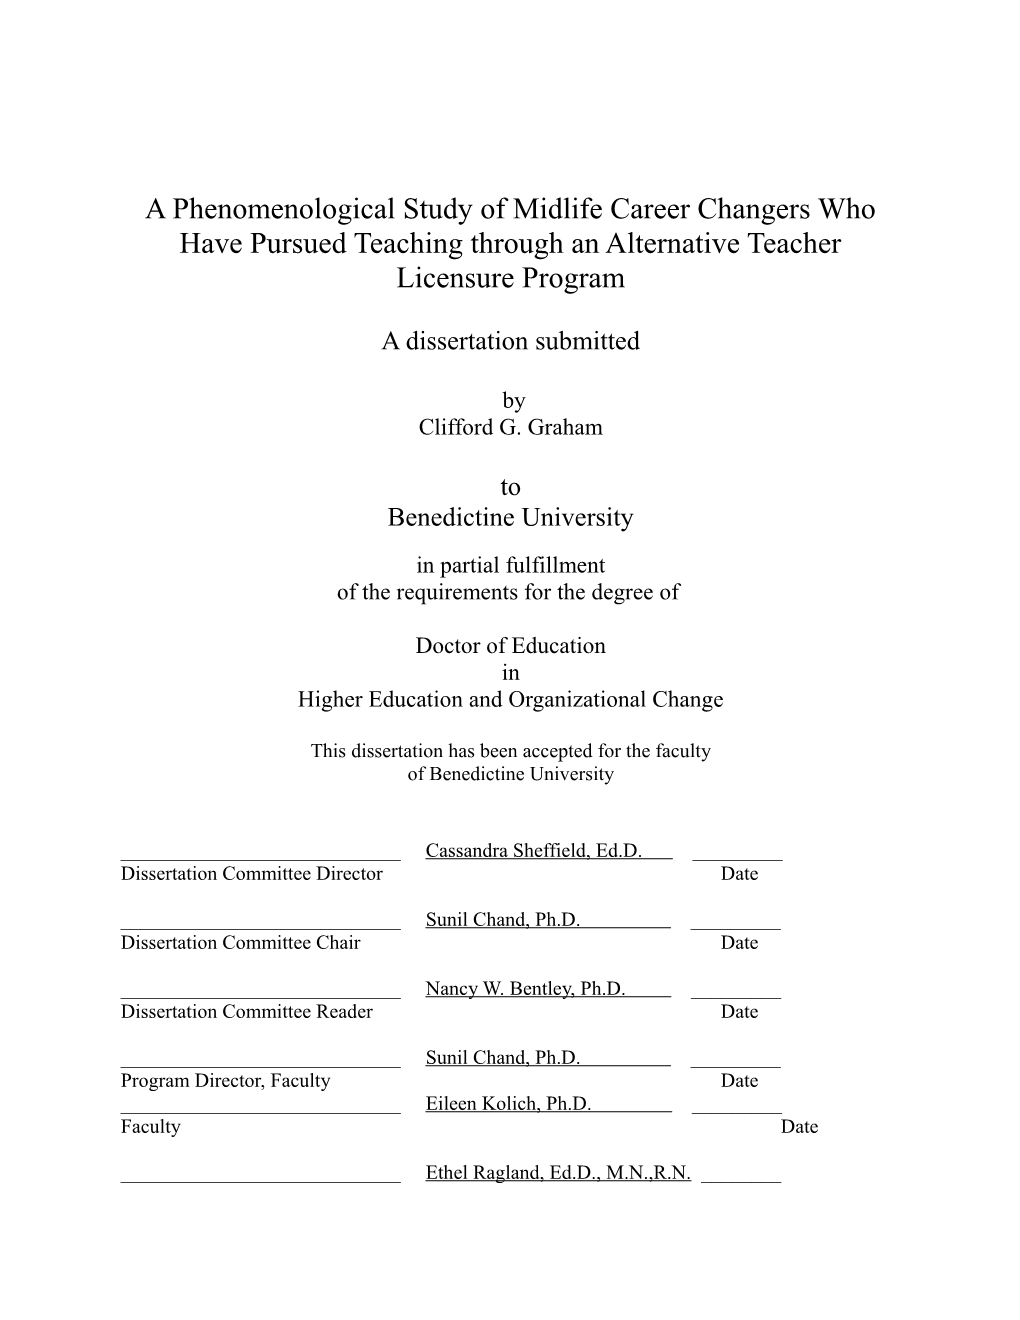 A Phenomenological Study of Midlife Career Changers Who Have Pursued Teaching Through An